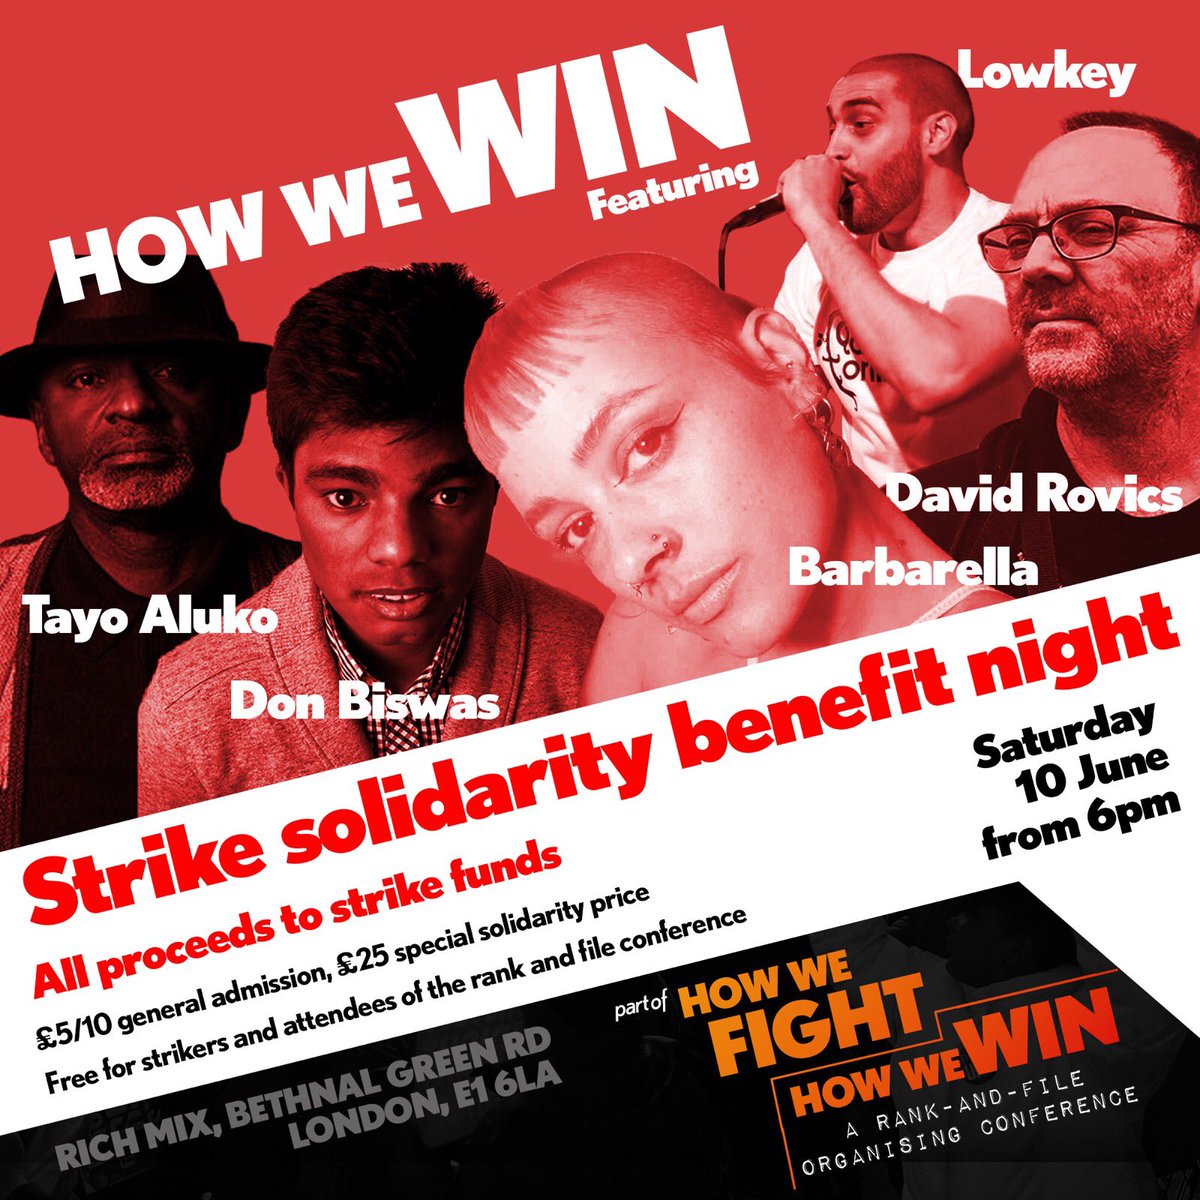 Join the Strike Solidarity Benefit on 10th June after the #RankAndFileConf with @Lowkey0nline @DonBiswascomedy and many more brilliant acts book here Link to book here ✊ eventbrite.co.uk/e/how-we-win-s…